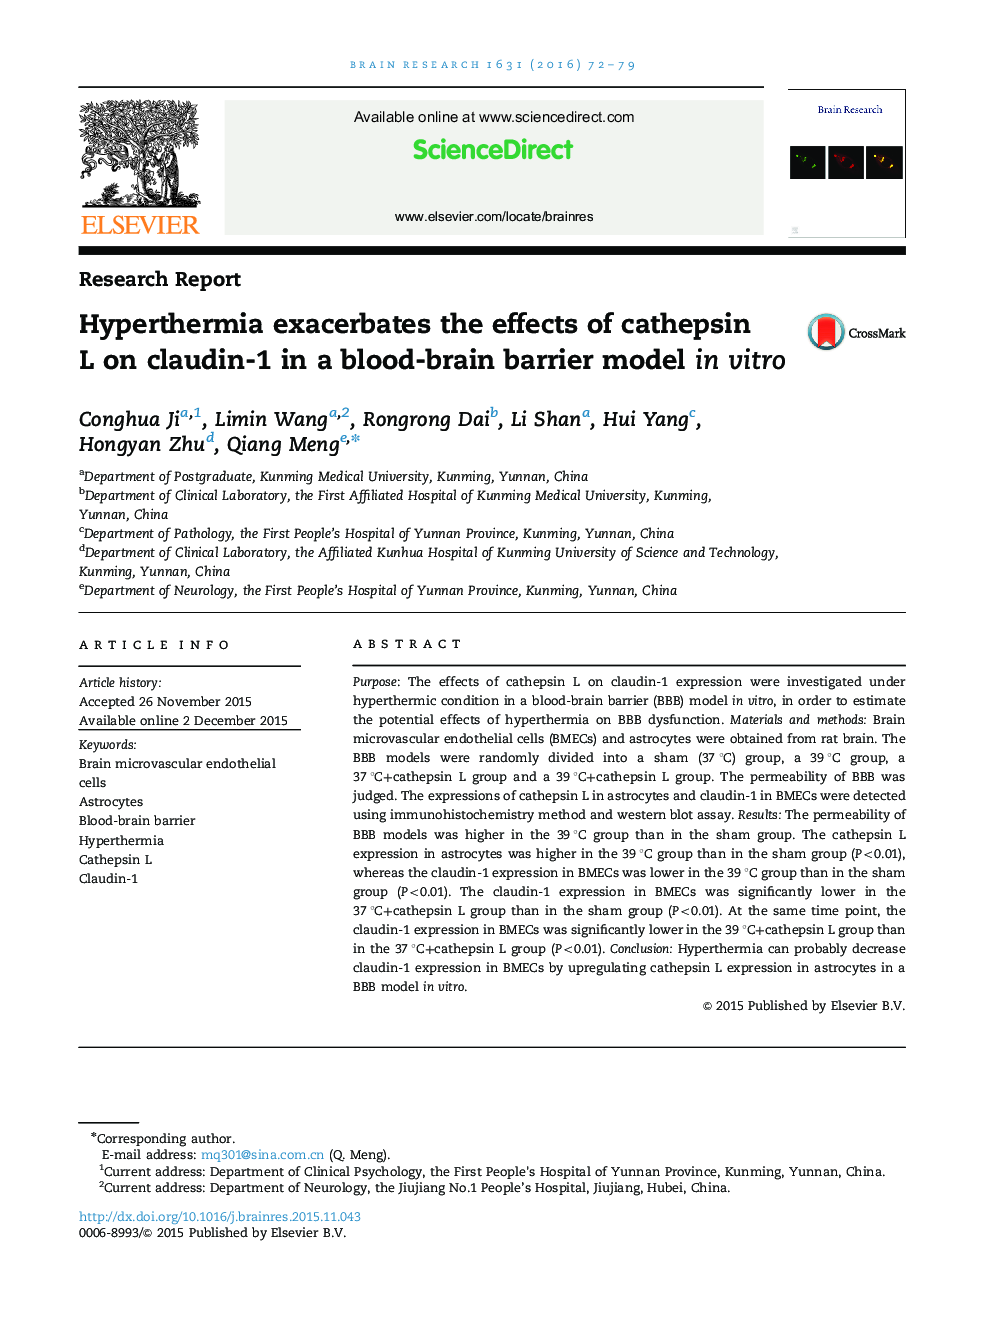 Research ReportHyperthermia exacerbates the effects of cathepsin L on claudin-1 in a blood-brain barrier model in vitro